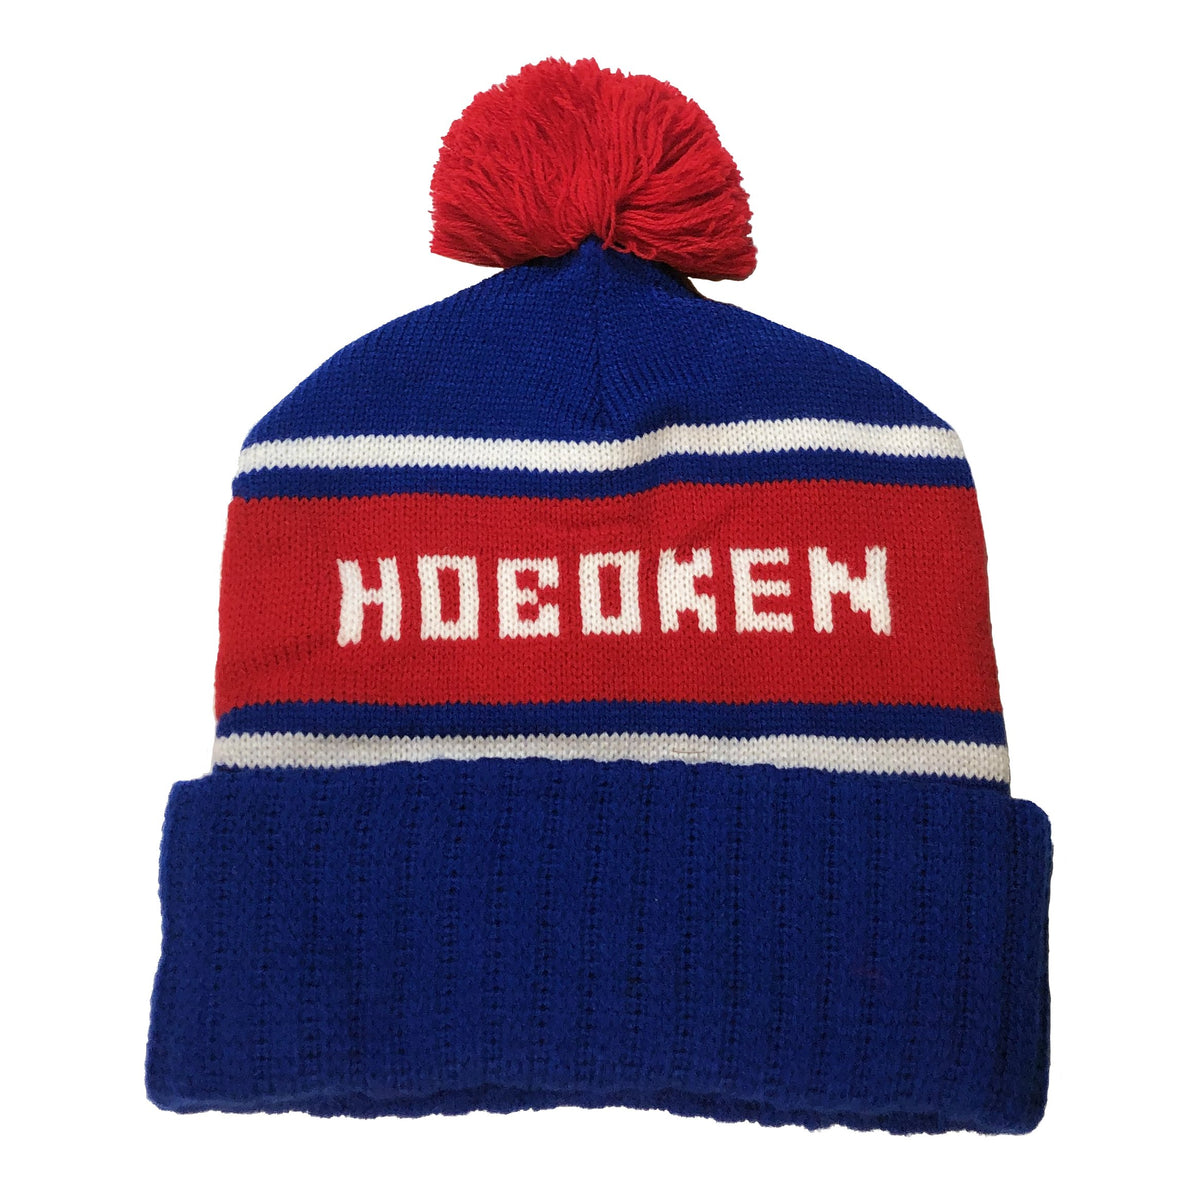 Vintage Inspired Hoboken Winter Pom Pom Hat | Cool Retro Knit Square Mile Beanie | Solid Threads